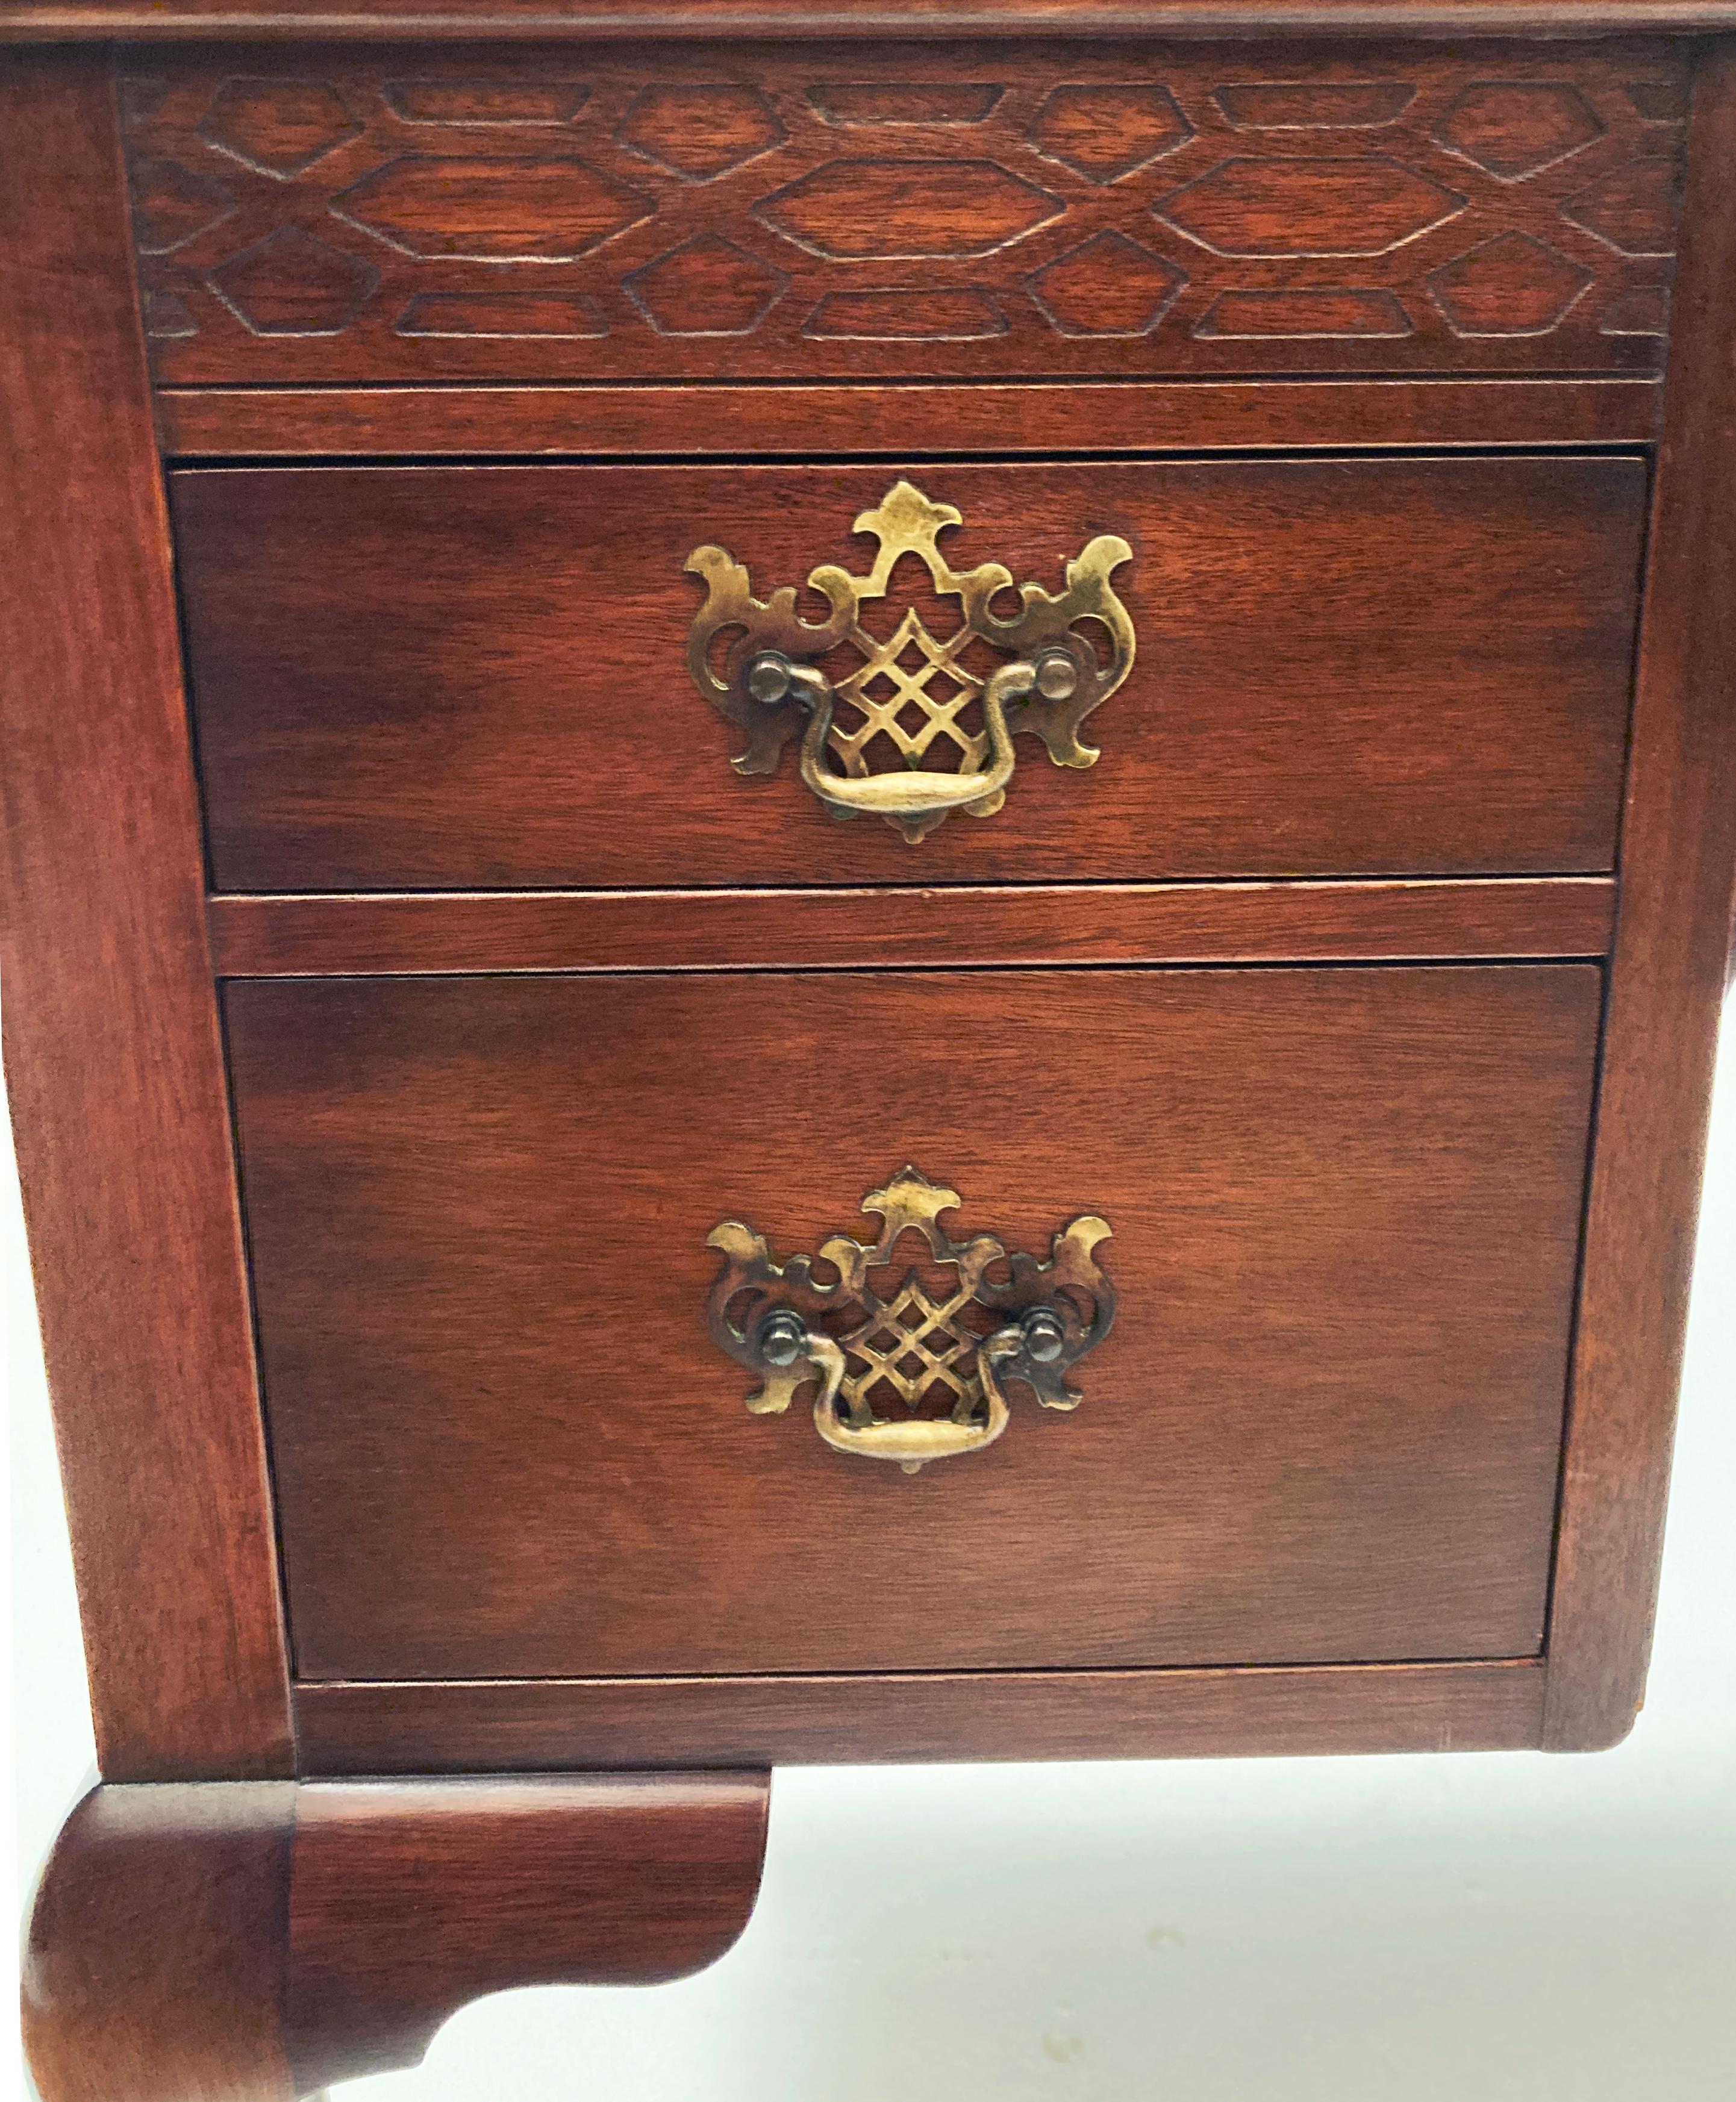 chippendale furniture history